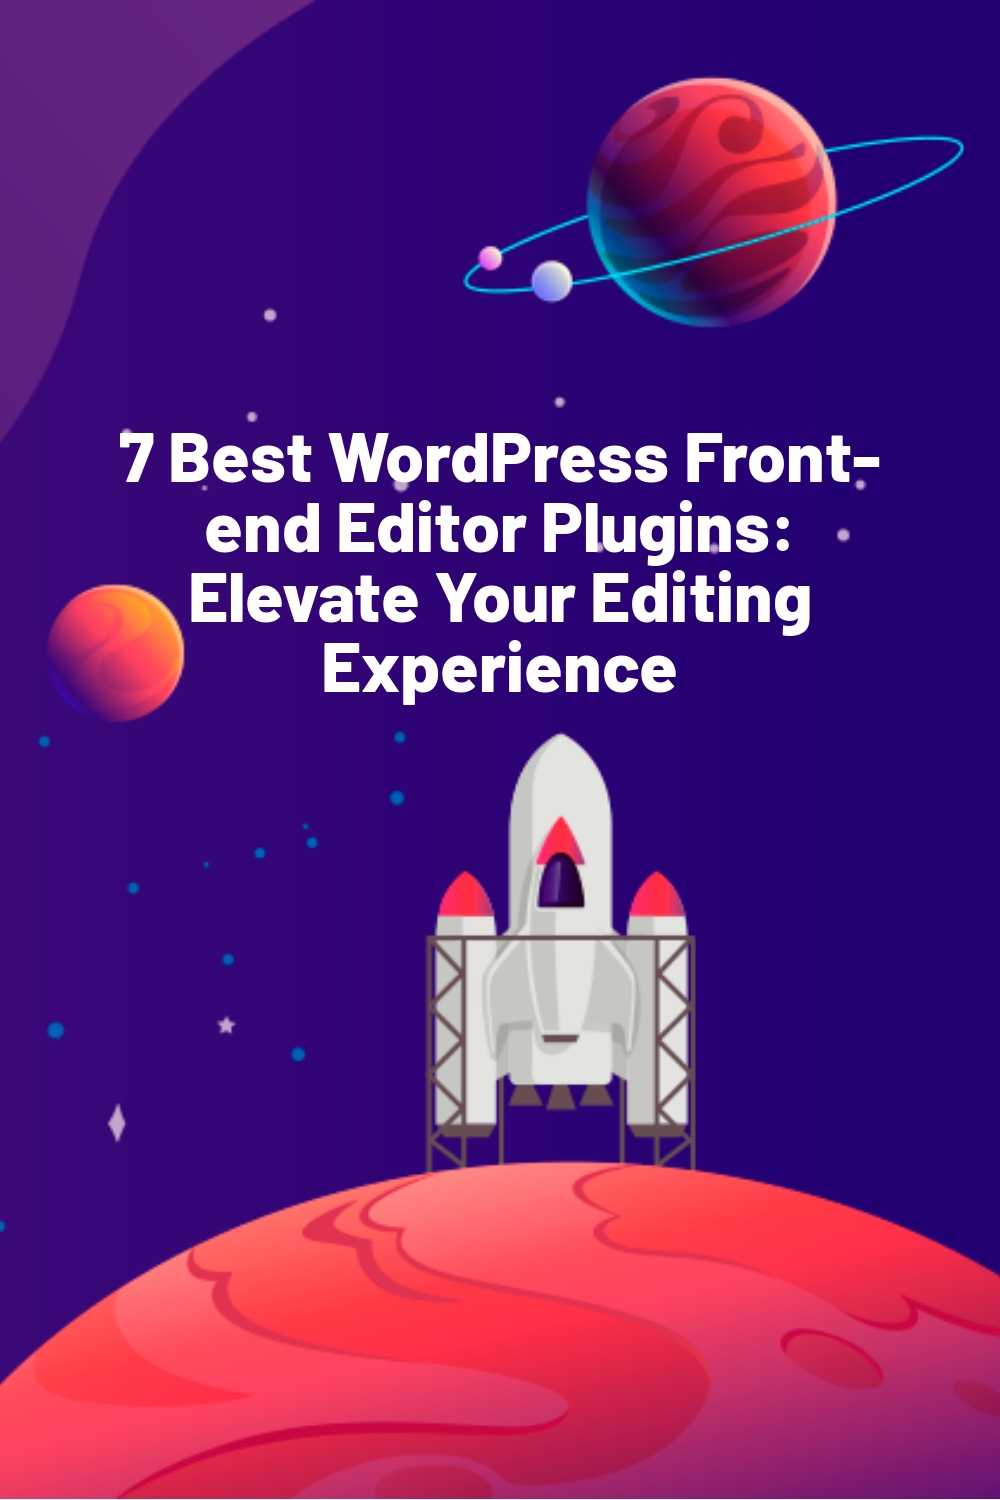 7 Best WordPress Front-end Editor Plugins: Elevate Your Editing Experience